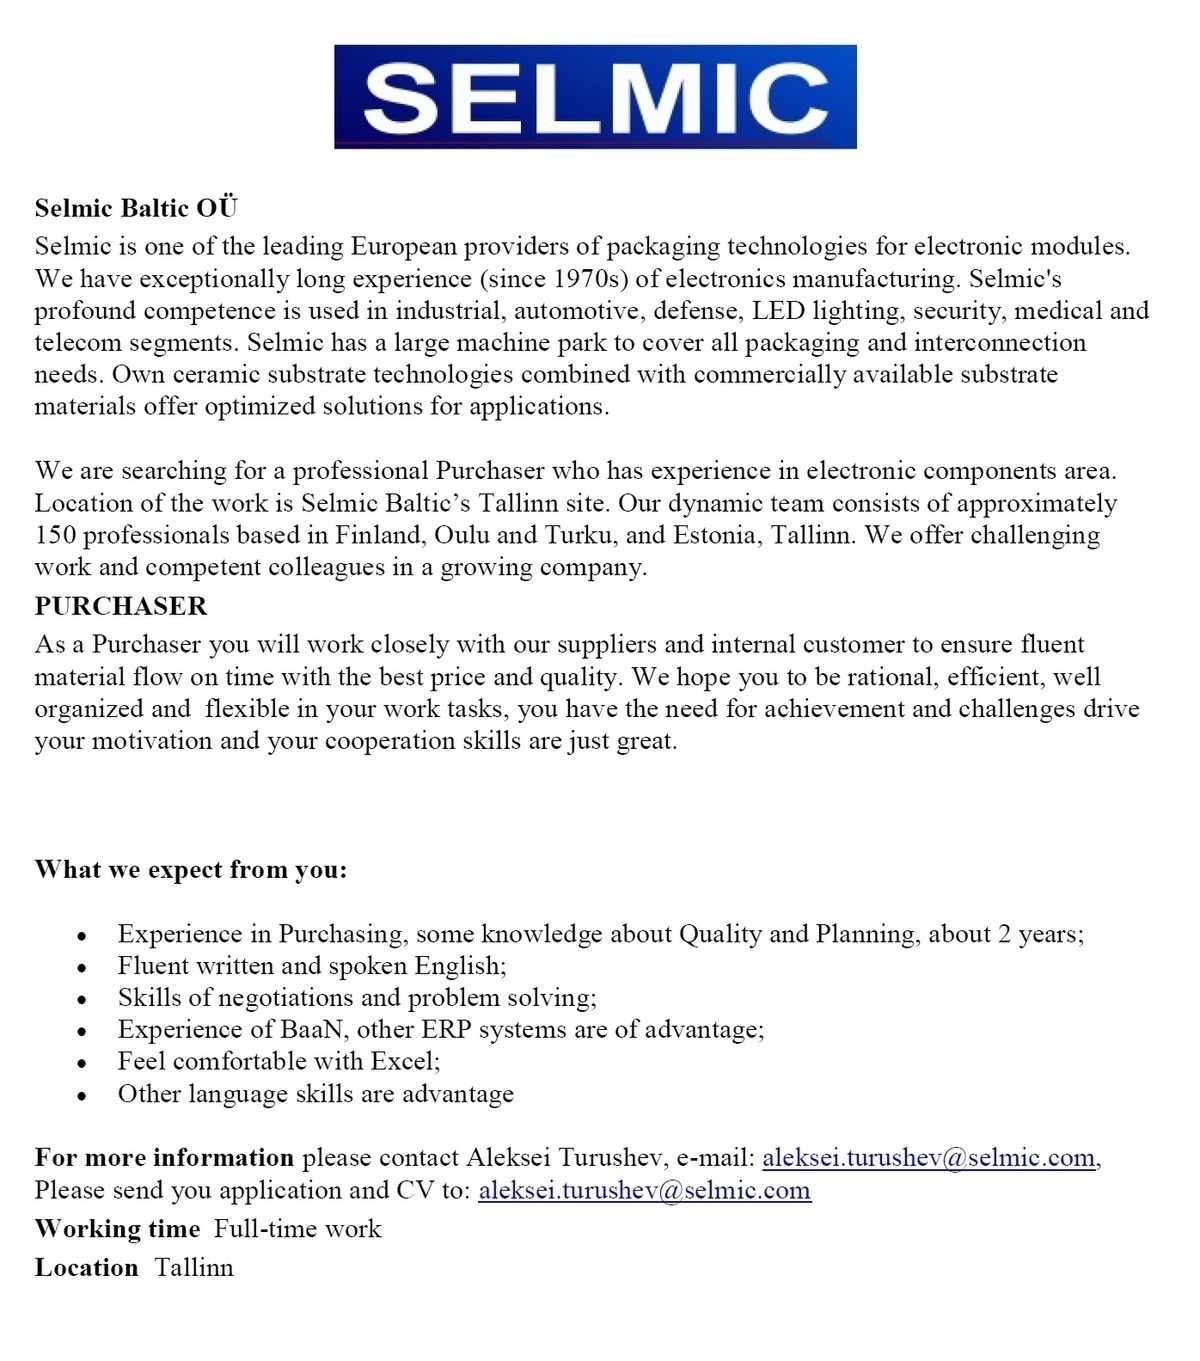 SELMIC BALTIC OÜ PURCHASER